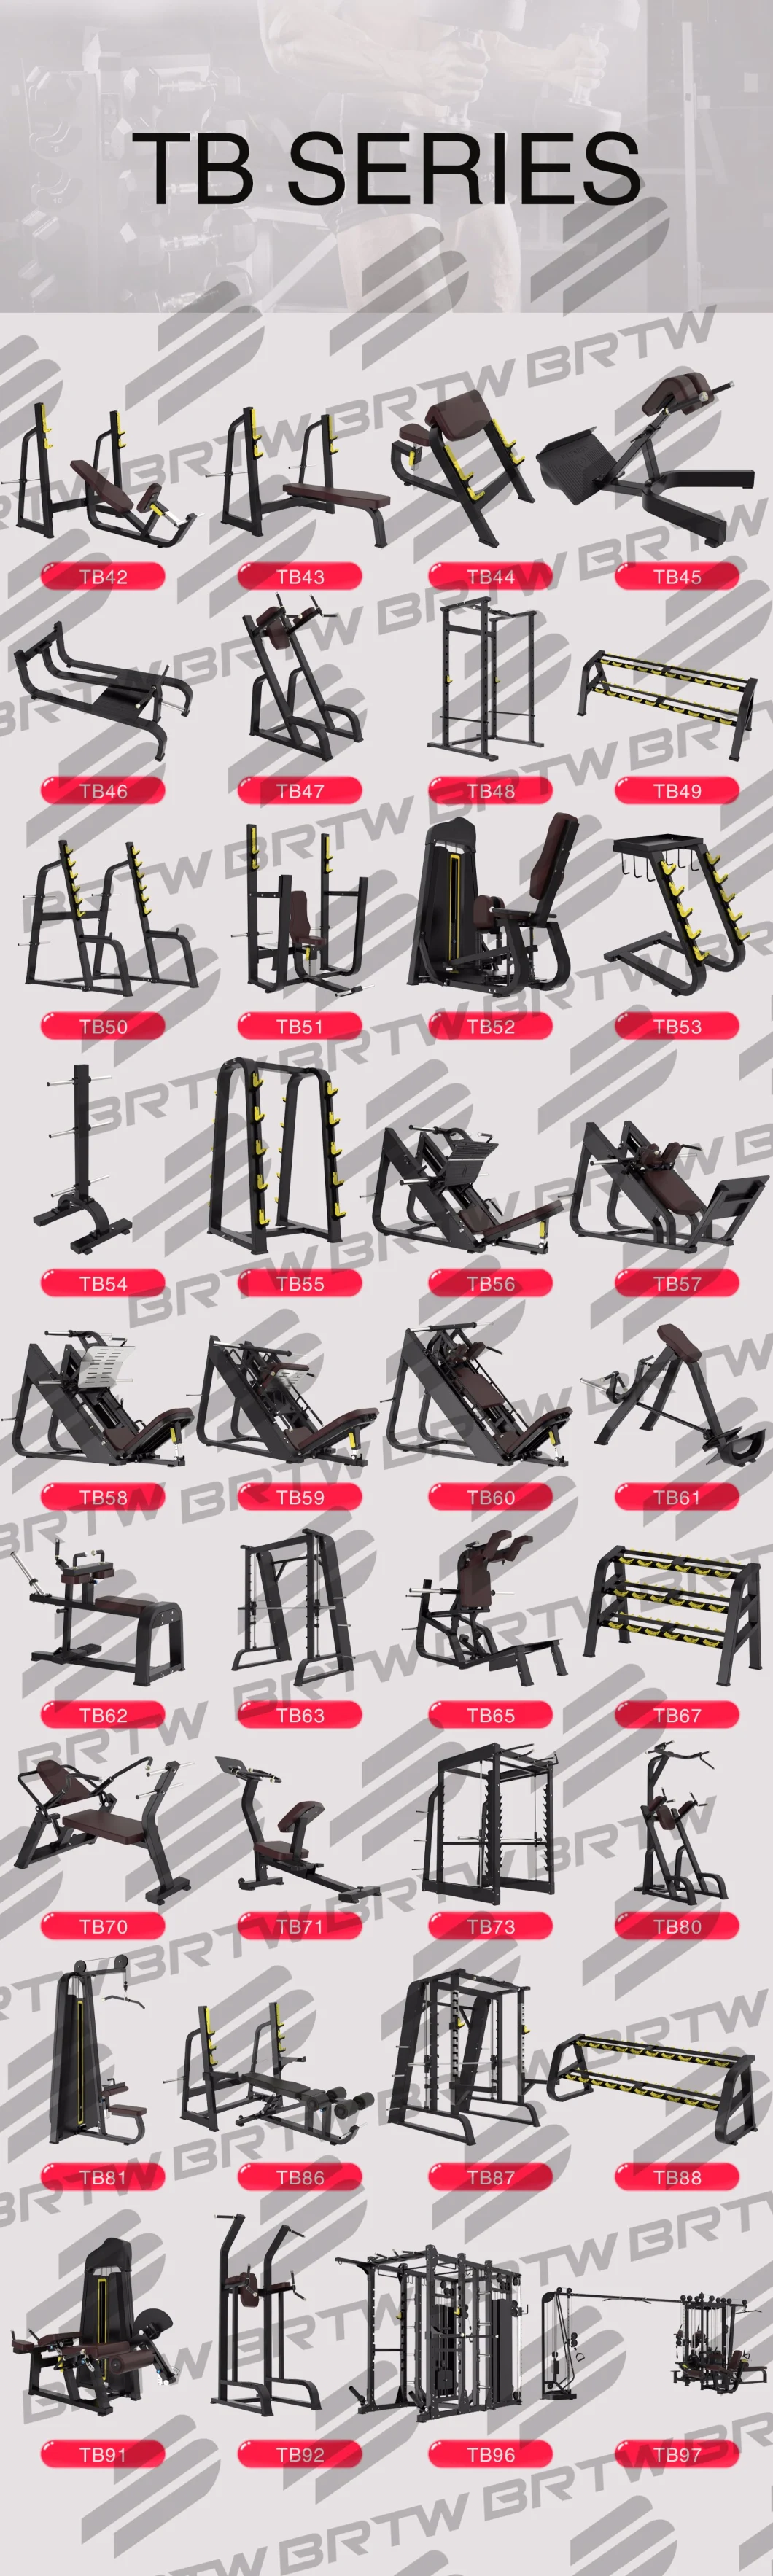 Classical Movement Rotary Torso Exercise Gym Workout Equipment Fitness for Bodybuilding